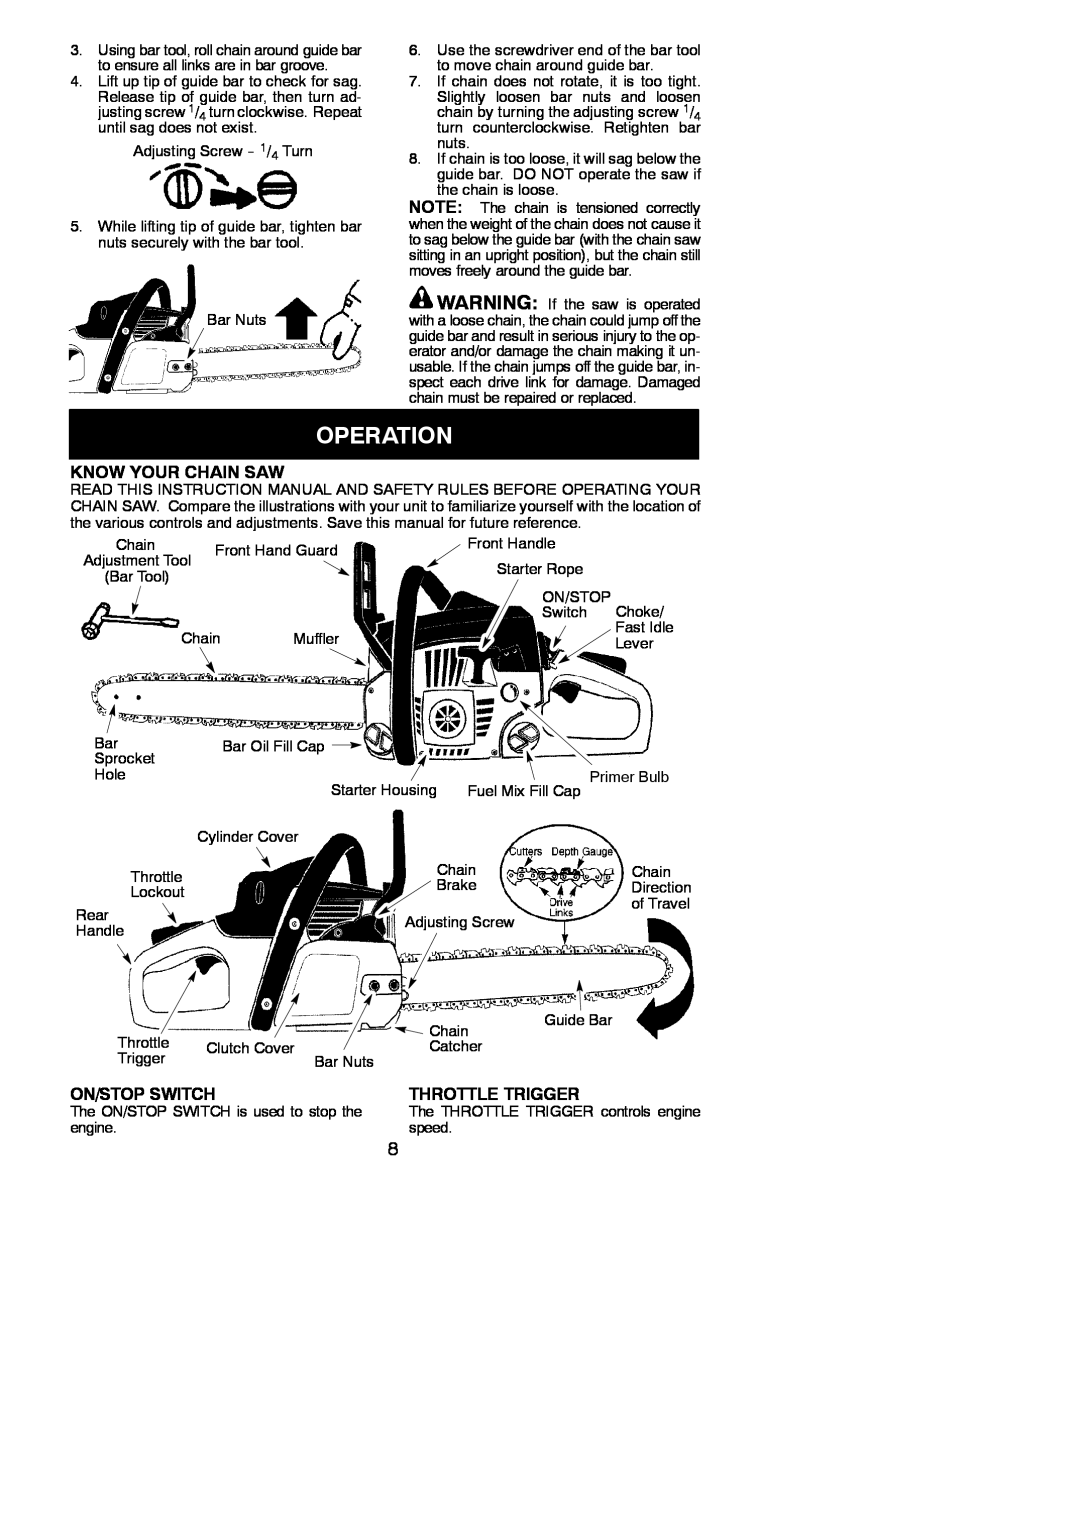 Poulan 545186810, 952802061, 952802062 instruction manual Operation, Know Your Chain Saw, On/Stop Switch, Throttle Trigger 